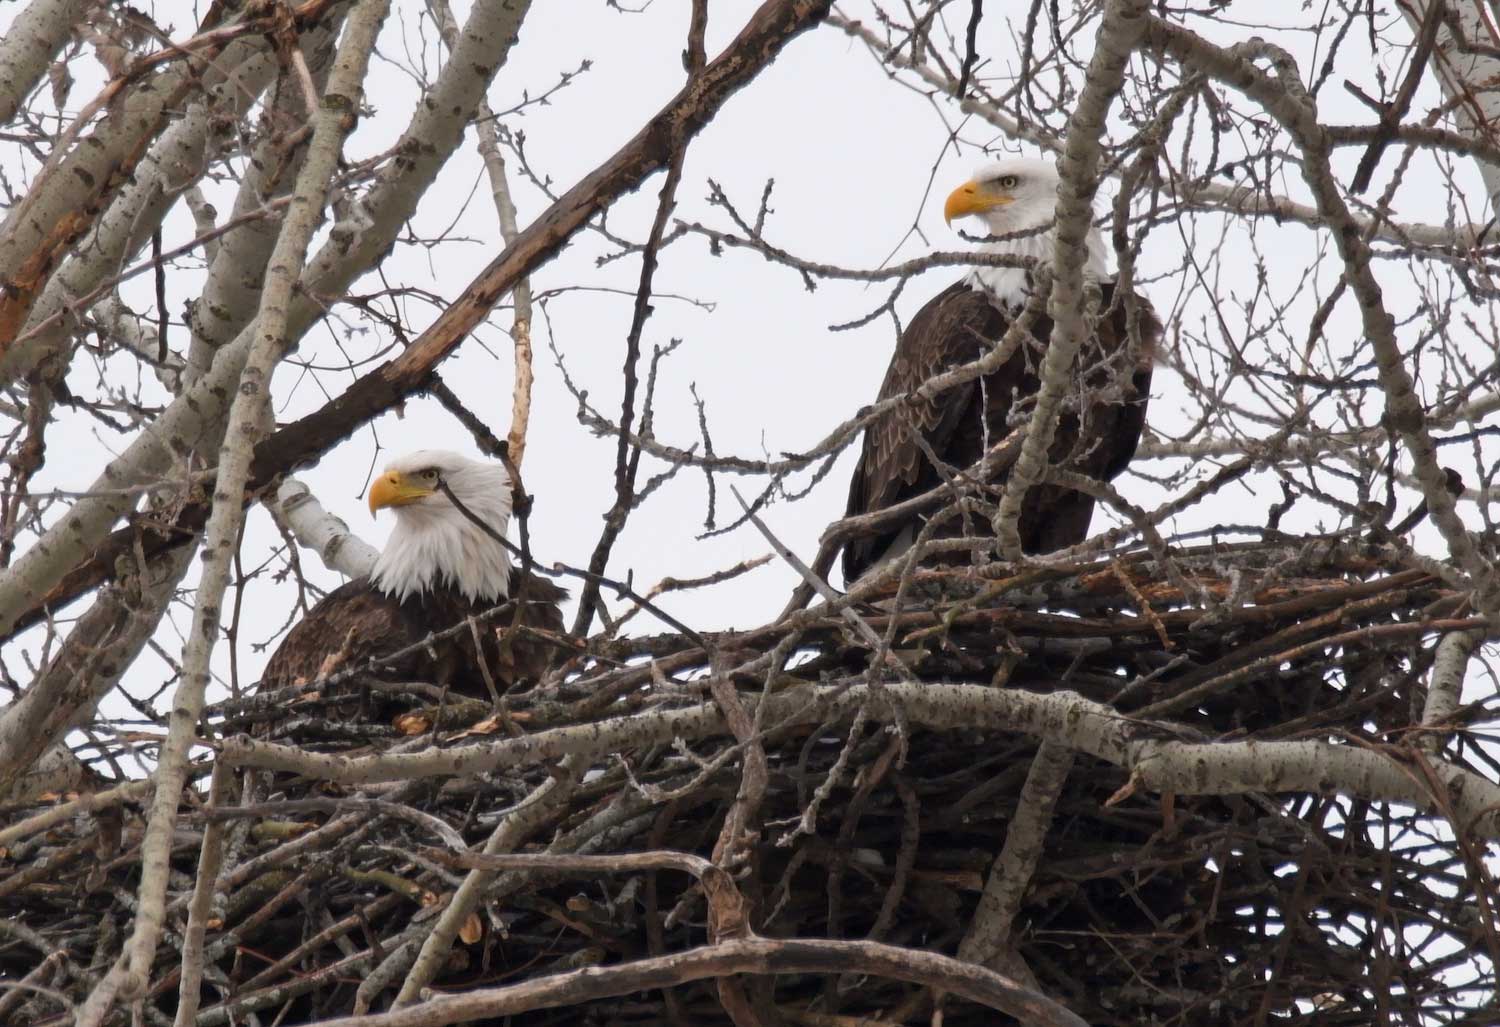 A pair of bald eagles on their nest.